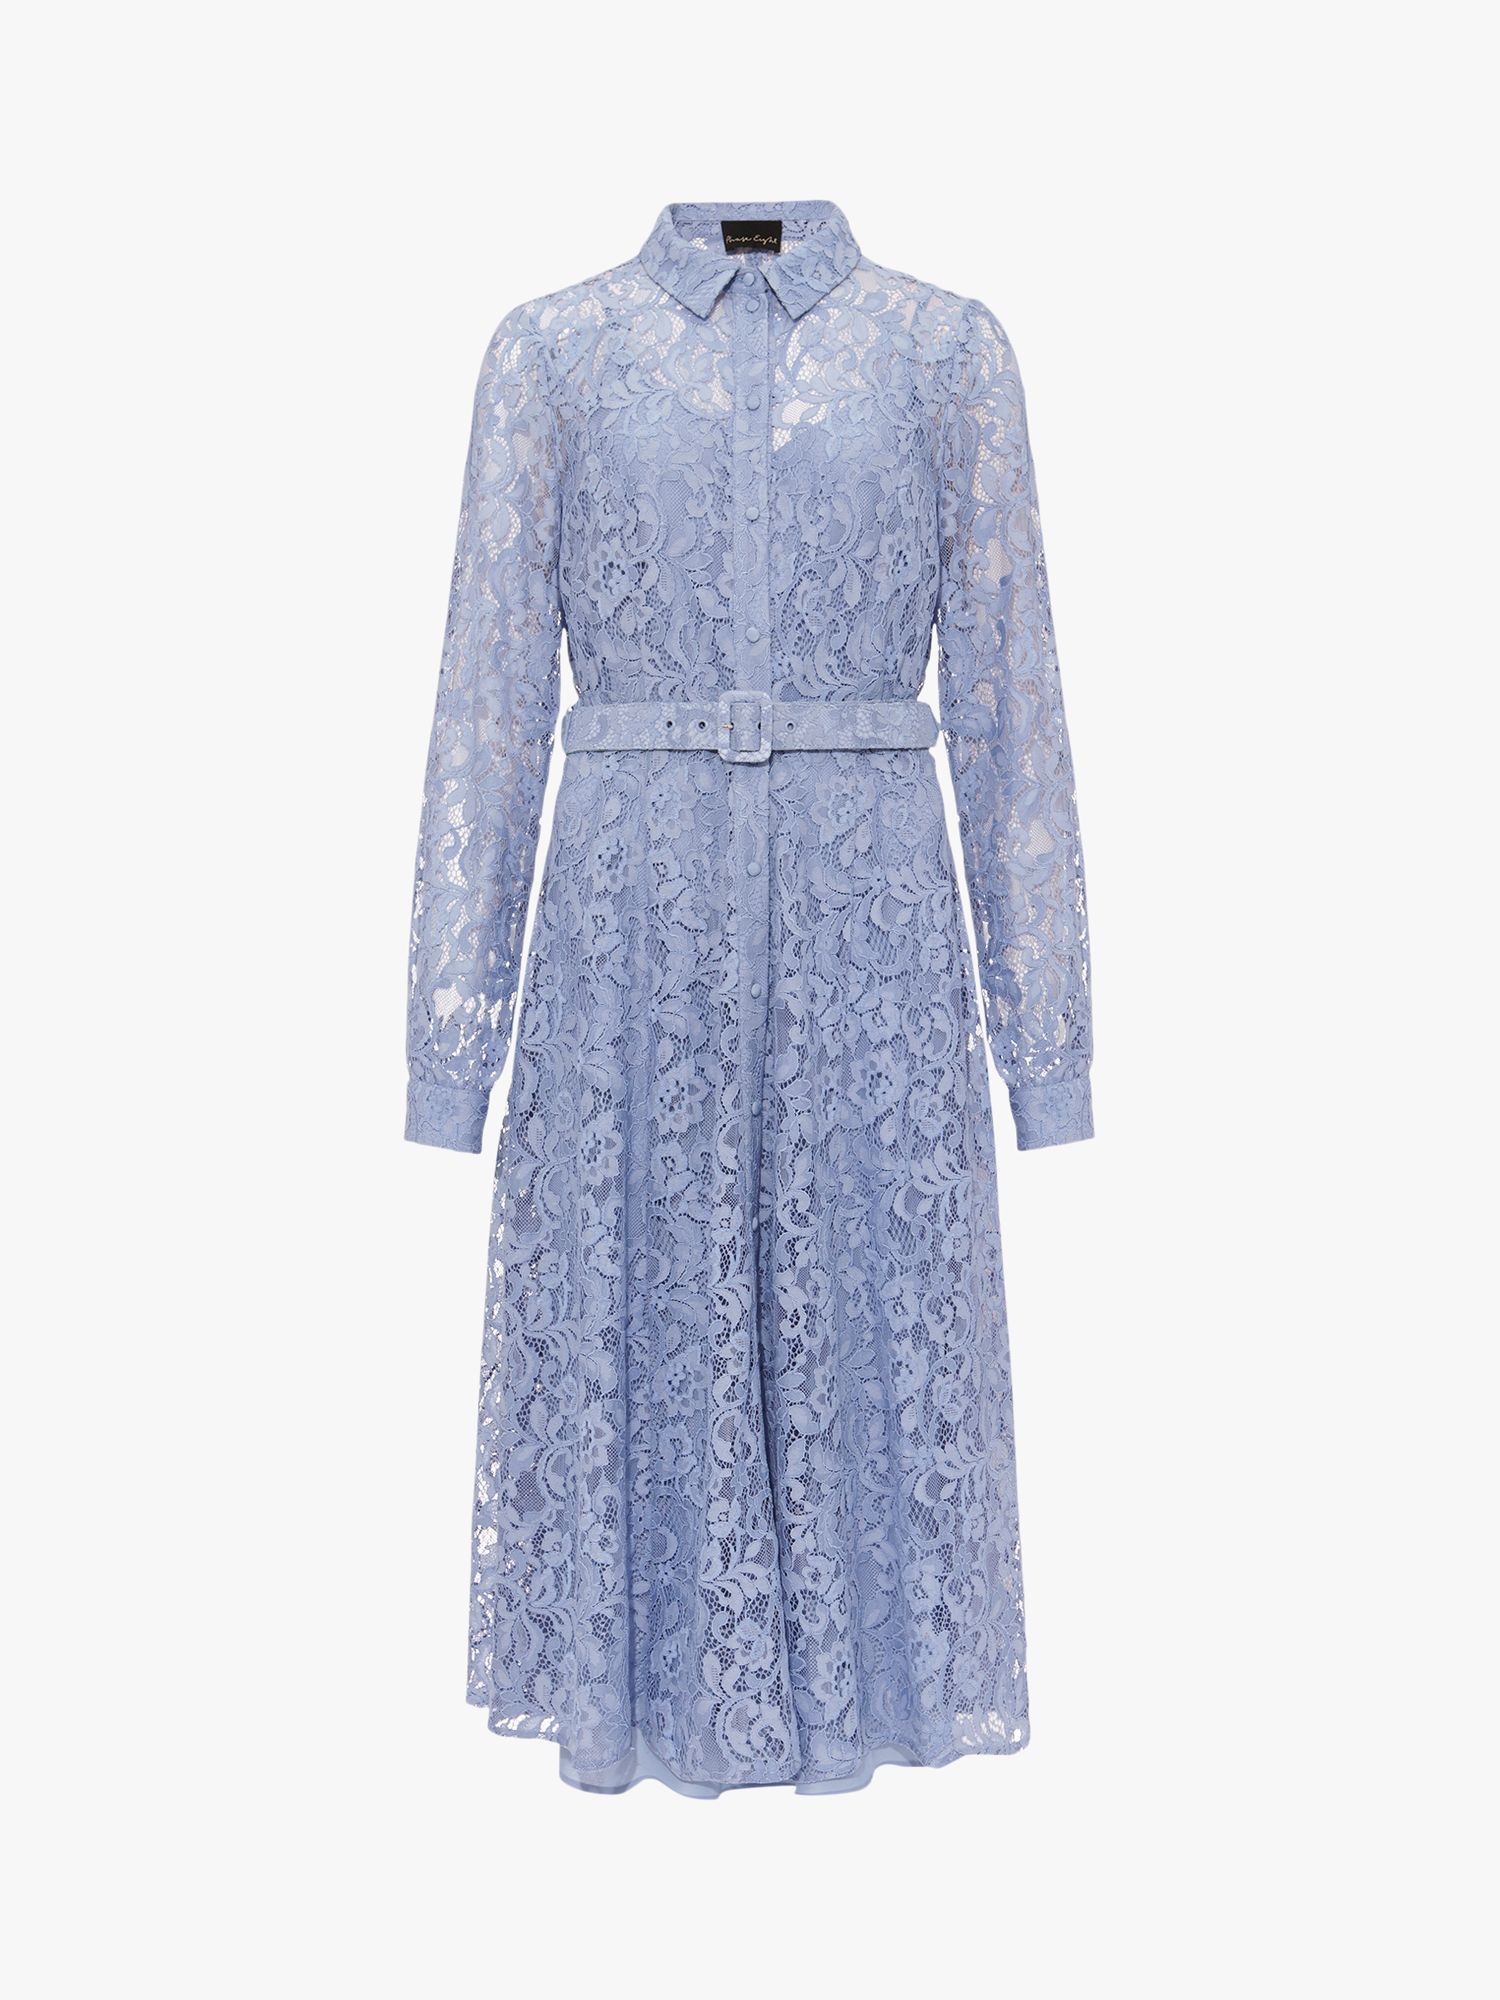 Phase Eight Autumn Lace Belted Midi Dress, Bluebell